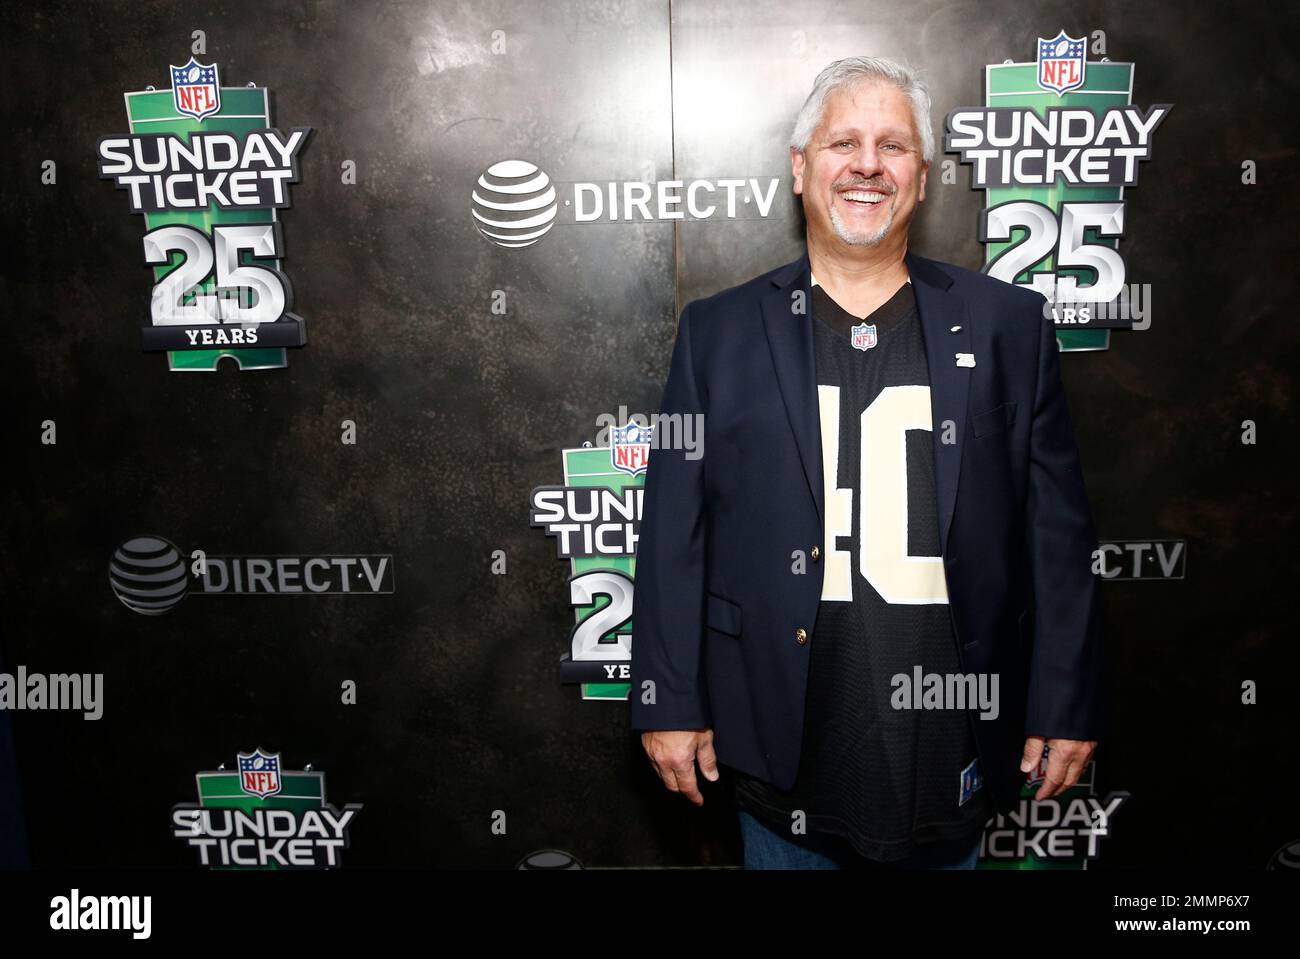 Richard Goldberg attends the NFL SUNDAY TICKET on DIRECTV 25th Season Kickoff Party at The Blond, Thursday, Aug